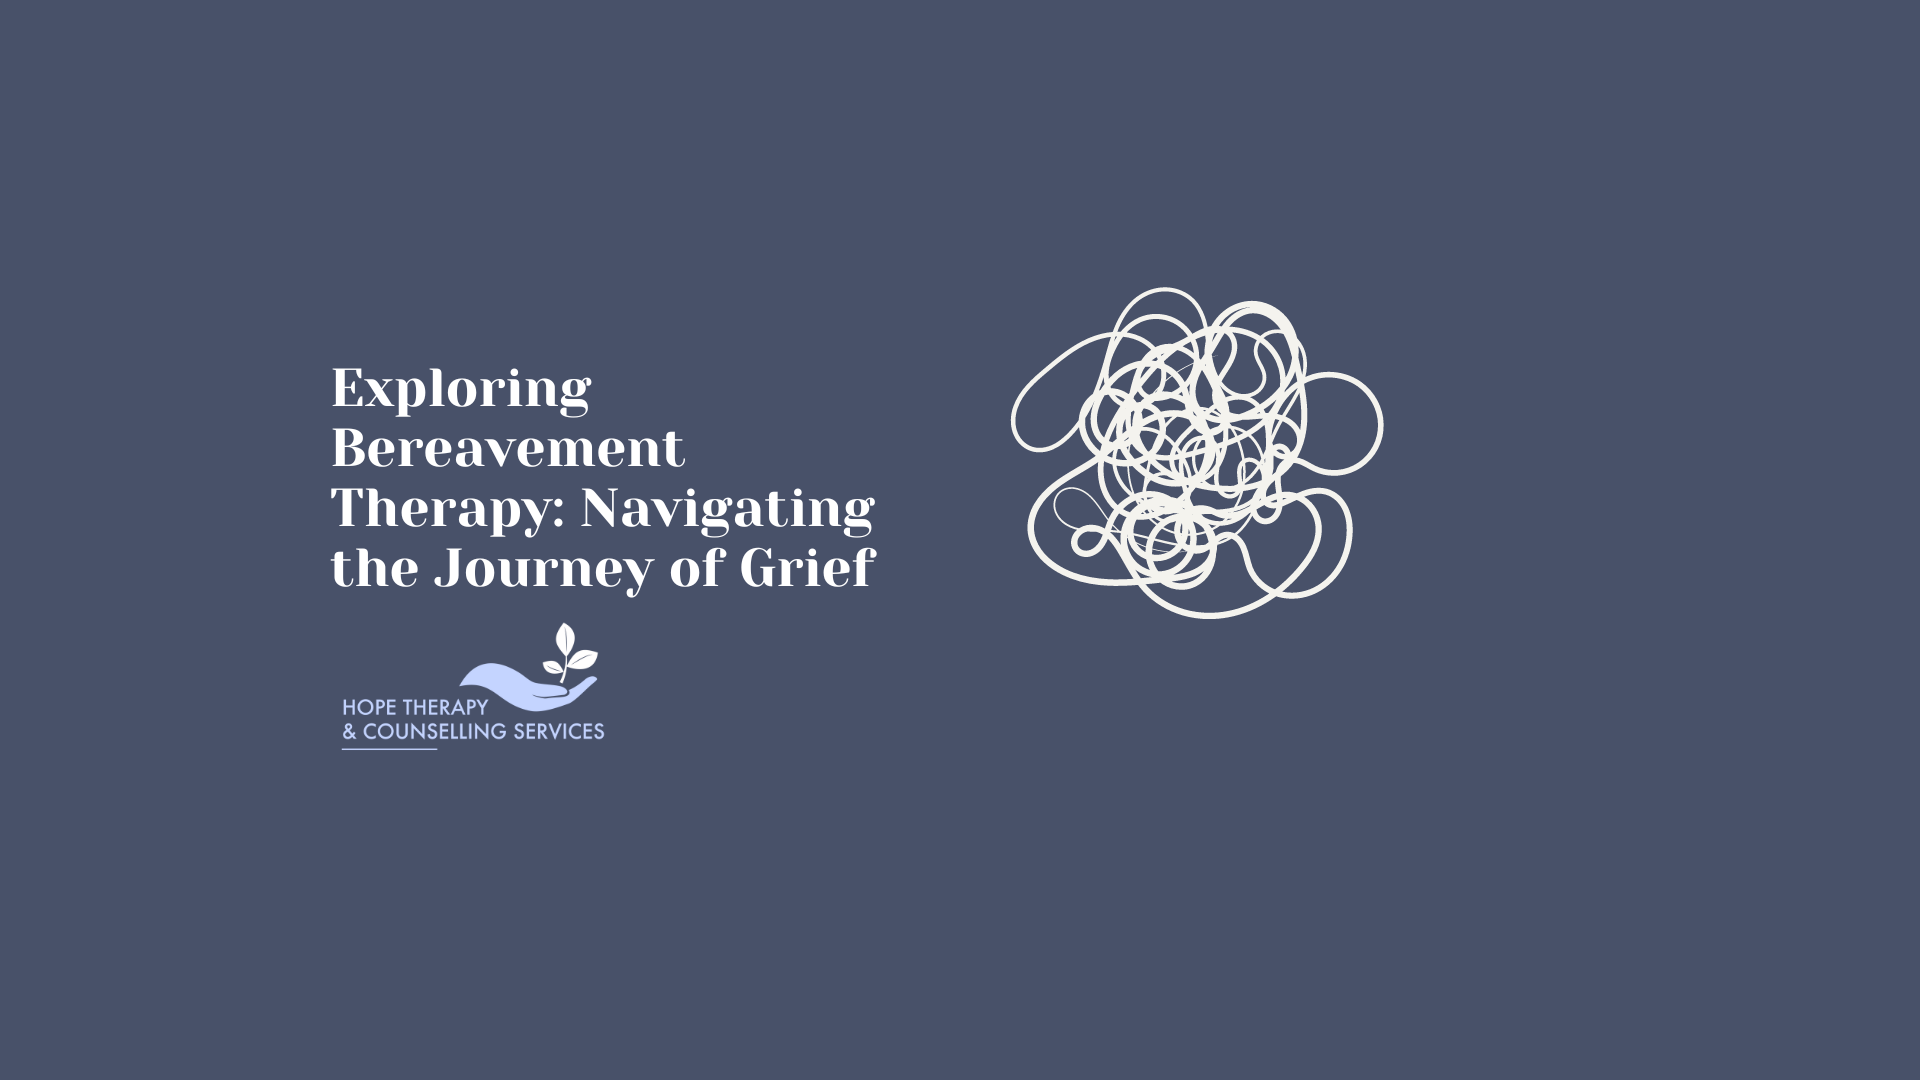 Exploring Bereavement Therapy: Navigating the Journey of Grief